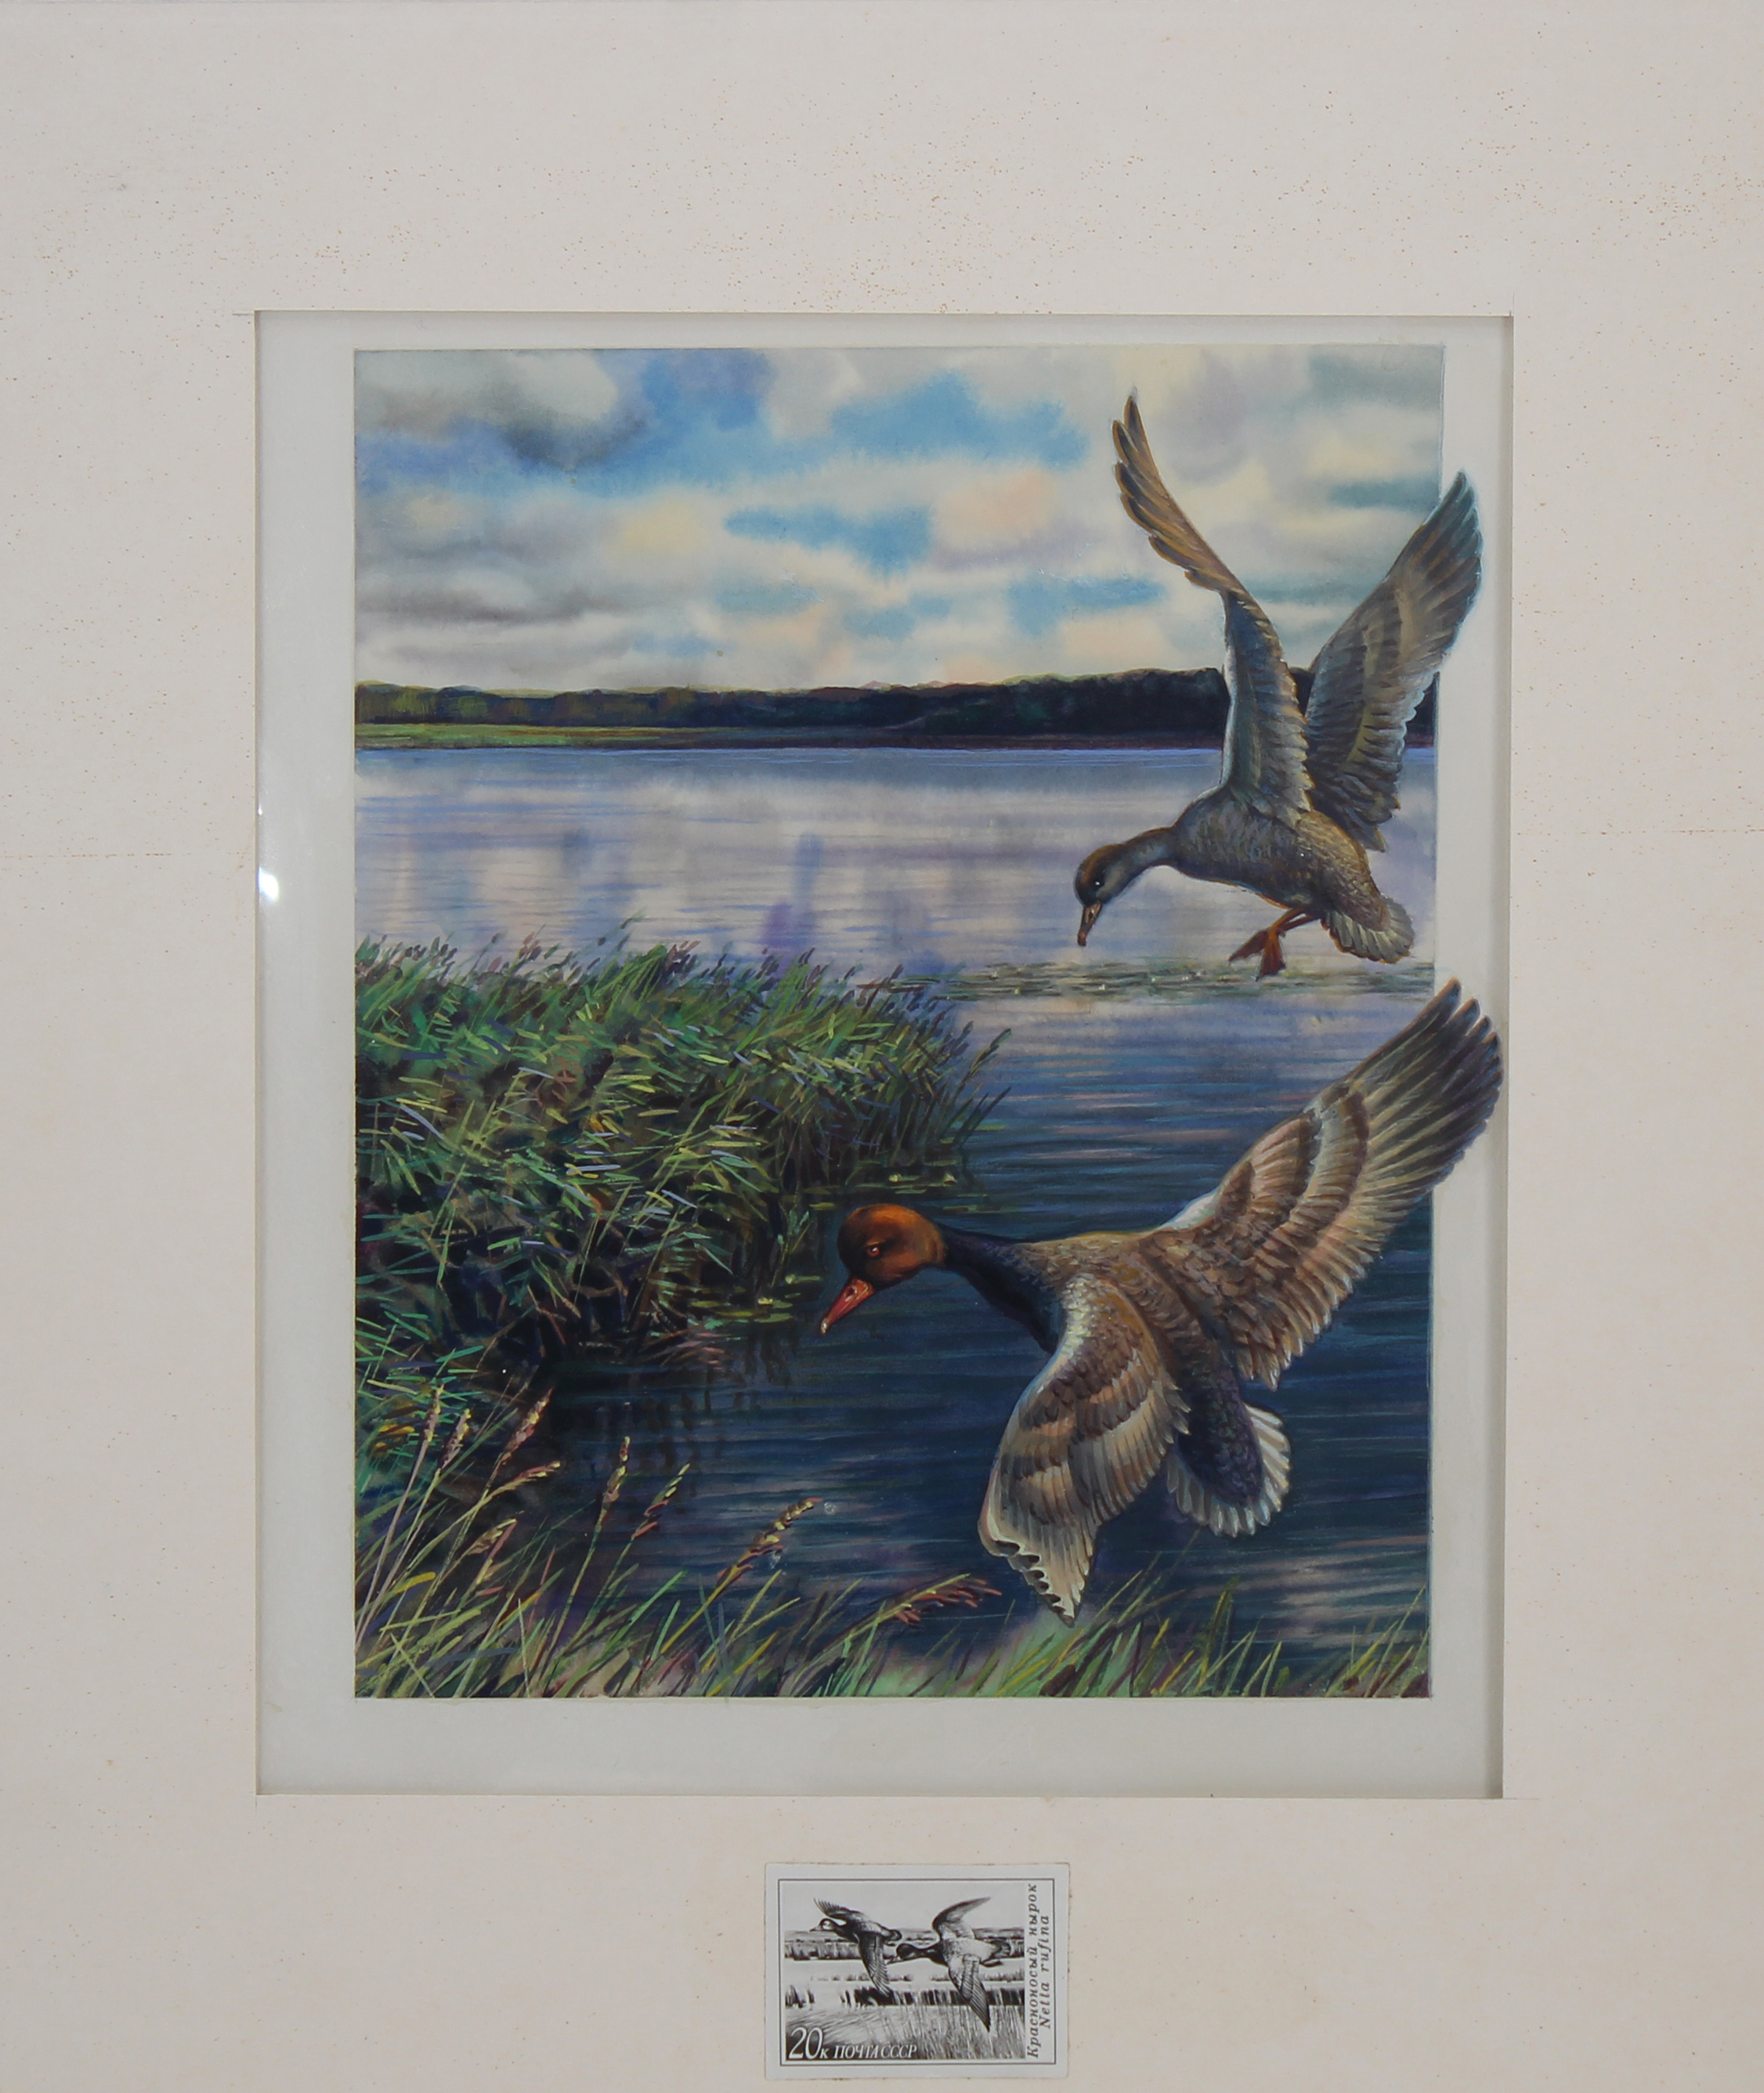 Ivan Kozlov (Russian, B. 1937) "Red-Crested Pochard" Signed and dated ('90) lower right. Original